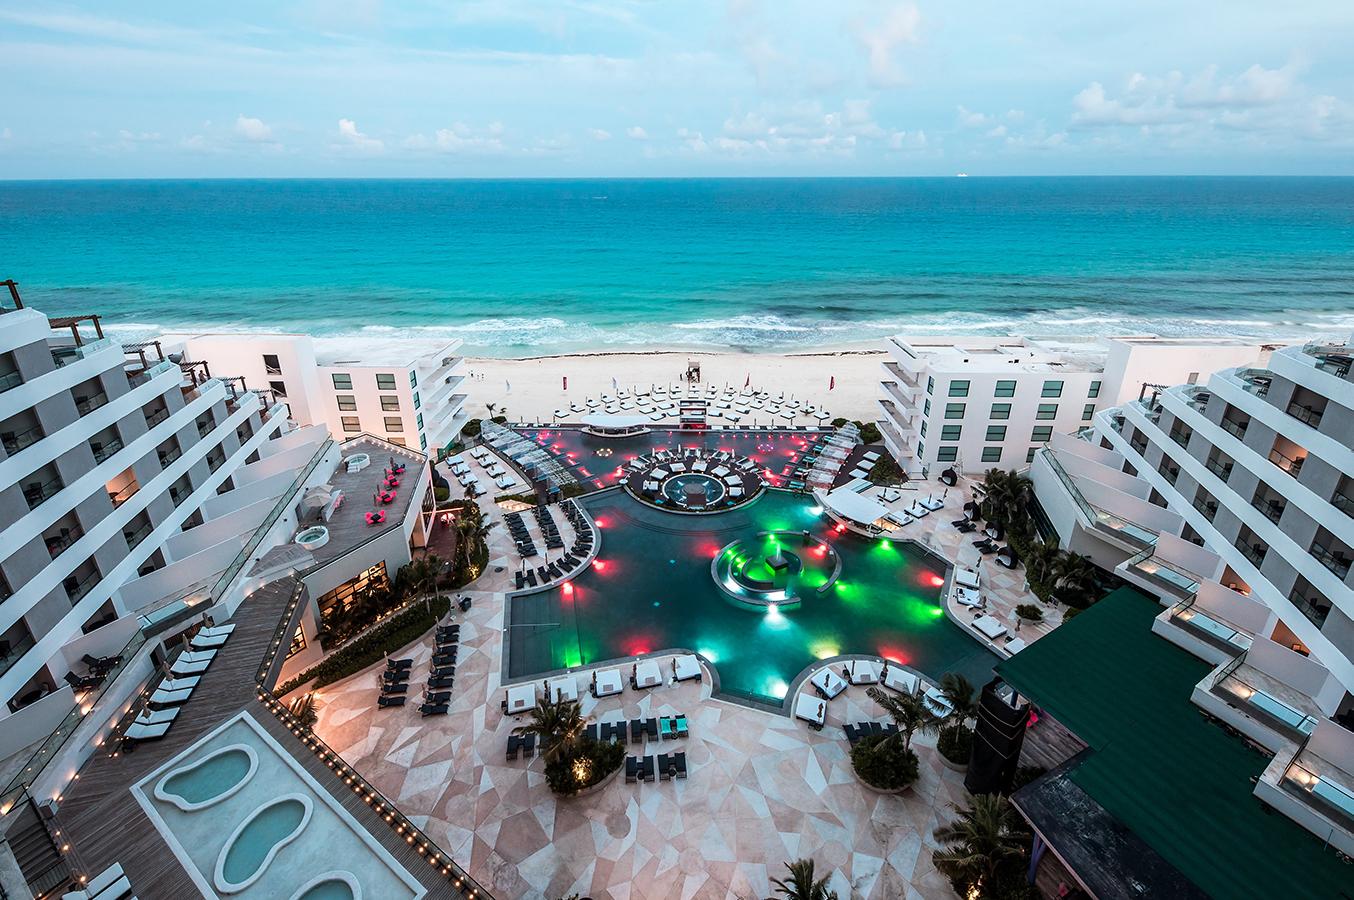 Aerial view of MelodyMaker Cancun’s beachside pool amenities